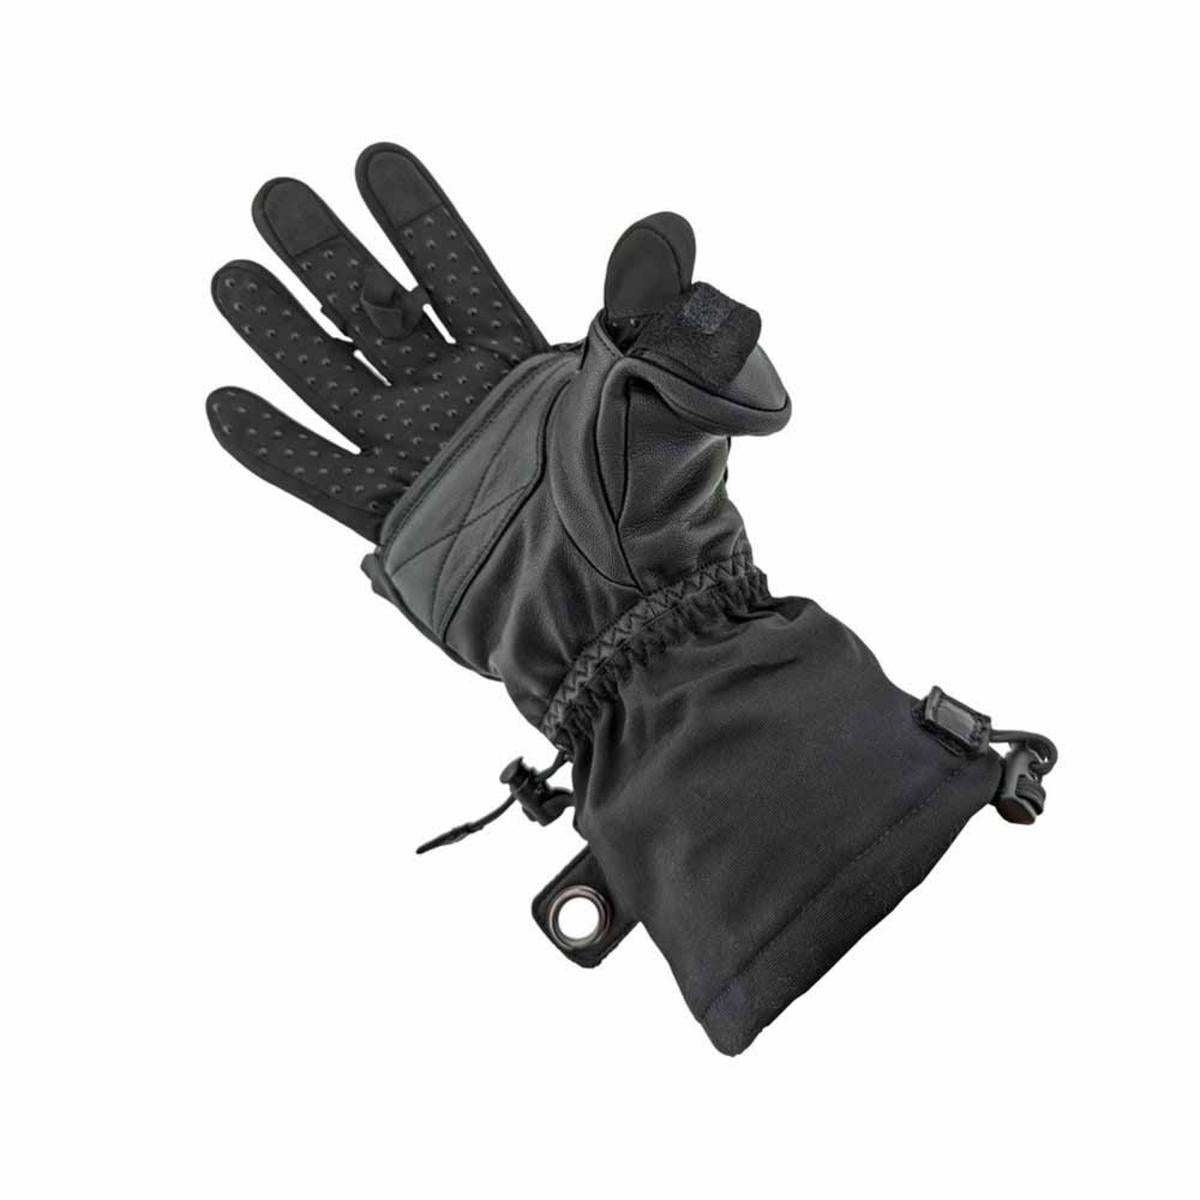 Glovii Universal 2-In-1 Heated Gloves with Insulated Cover